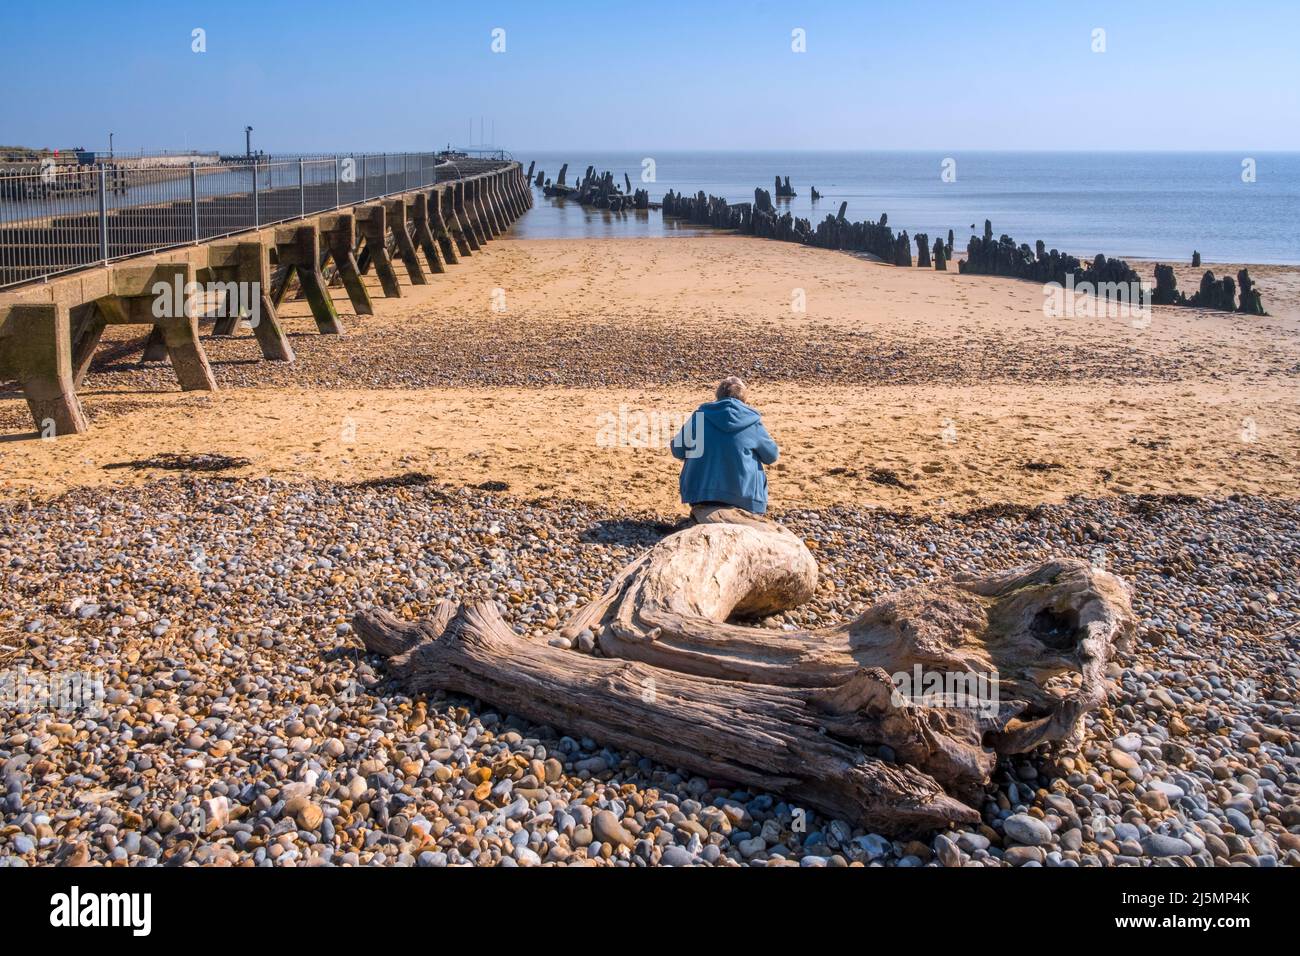 Groynes old and new, at low tide and a lady sitting on a large driftwood log at Walberswick estuary, Suffolk, UK. Stock Photo